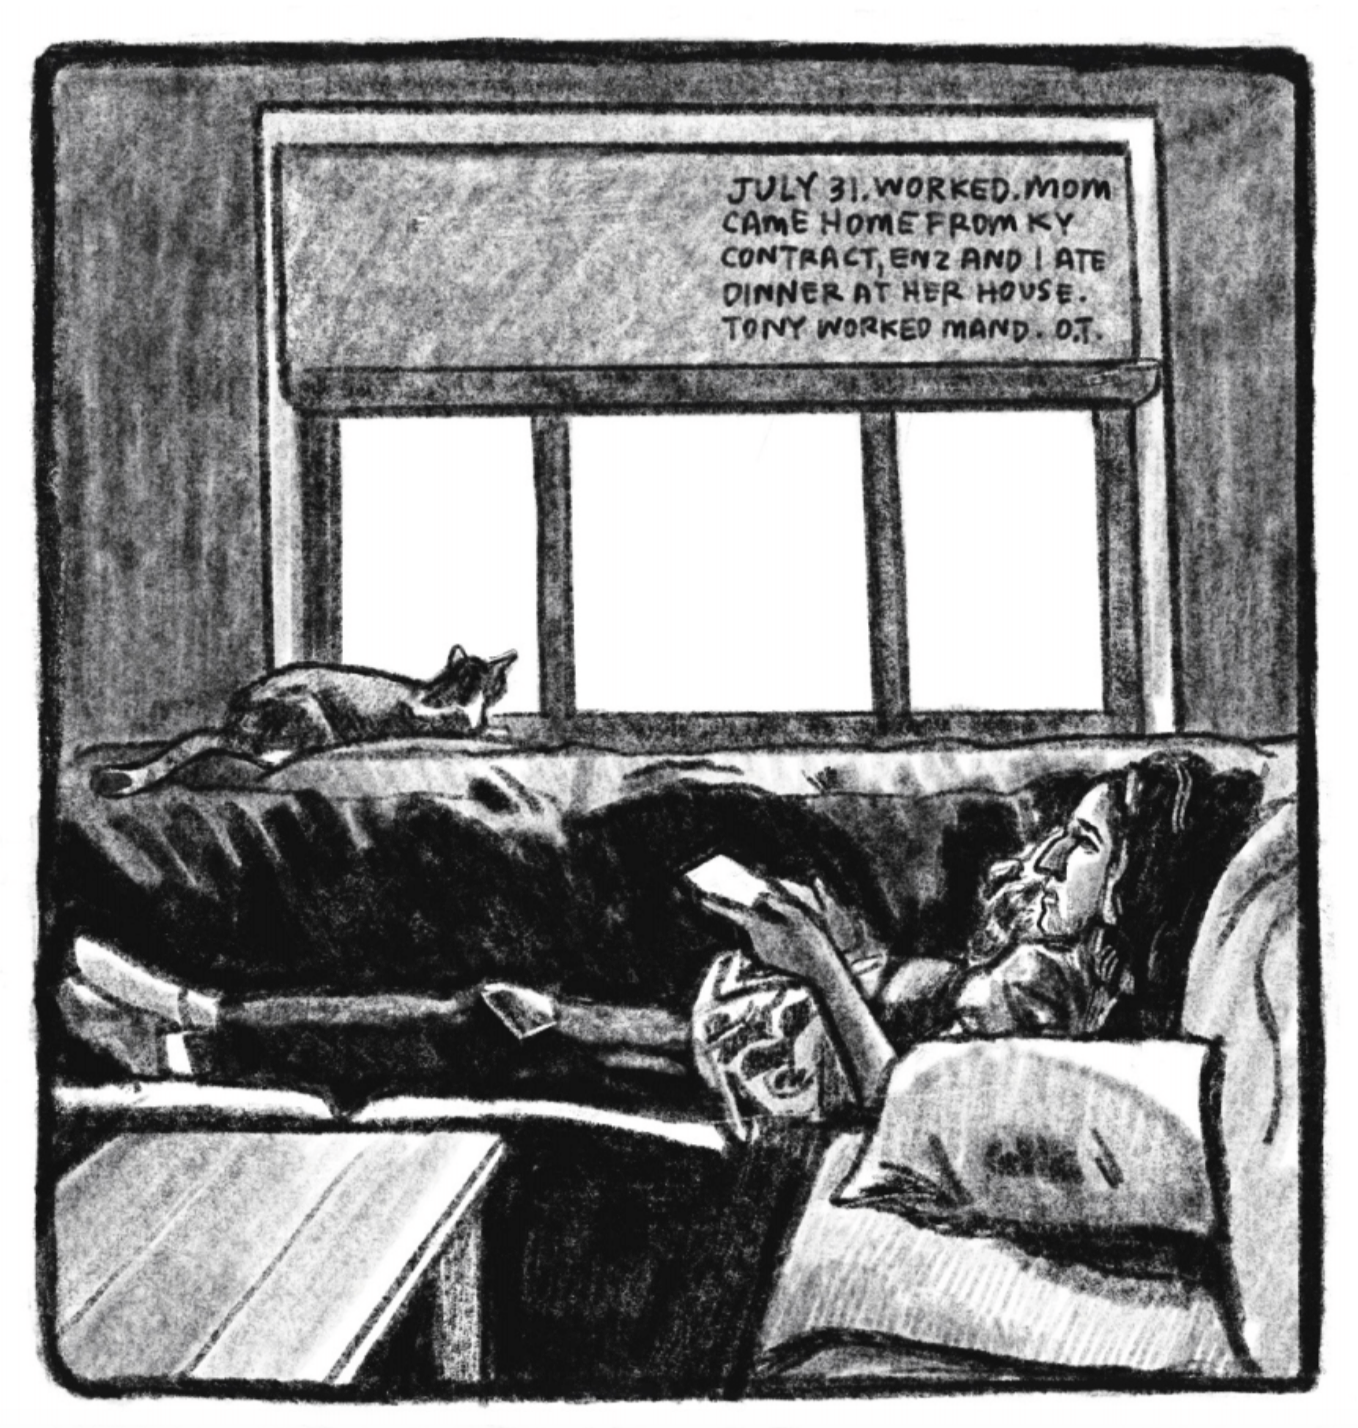 5. A woman with dark wavy hair and an aquiline nose lounges on a sectional couch; she is holding her phone or tablet in her hands but looking up at something in front of her, probably the TV. Behind the couch, a cat is perched at the window, looking outside. â€œJuly 31. Worked. Mom came home from Kentucky contract, Enz and I ate dinner at her house. Tony worked mandatory overtime.â€